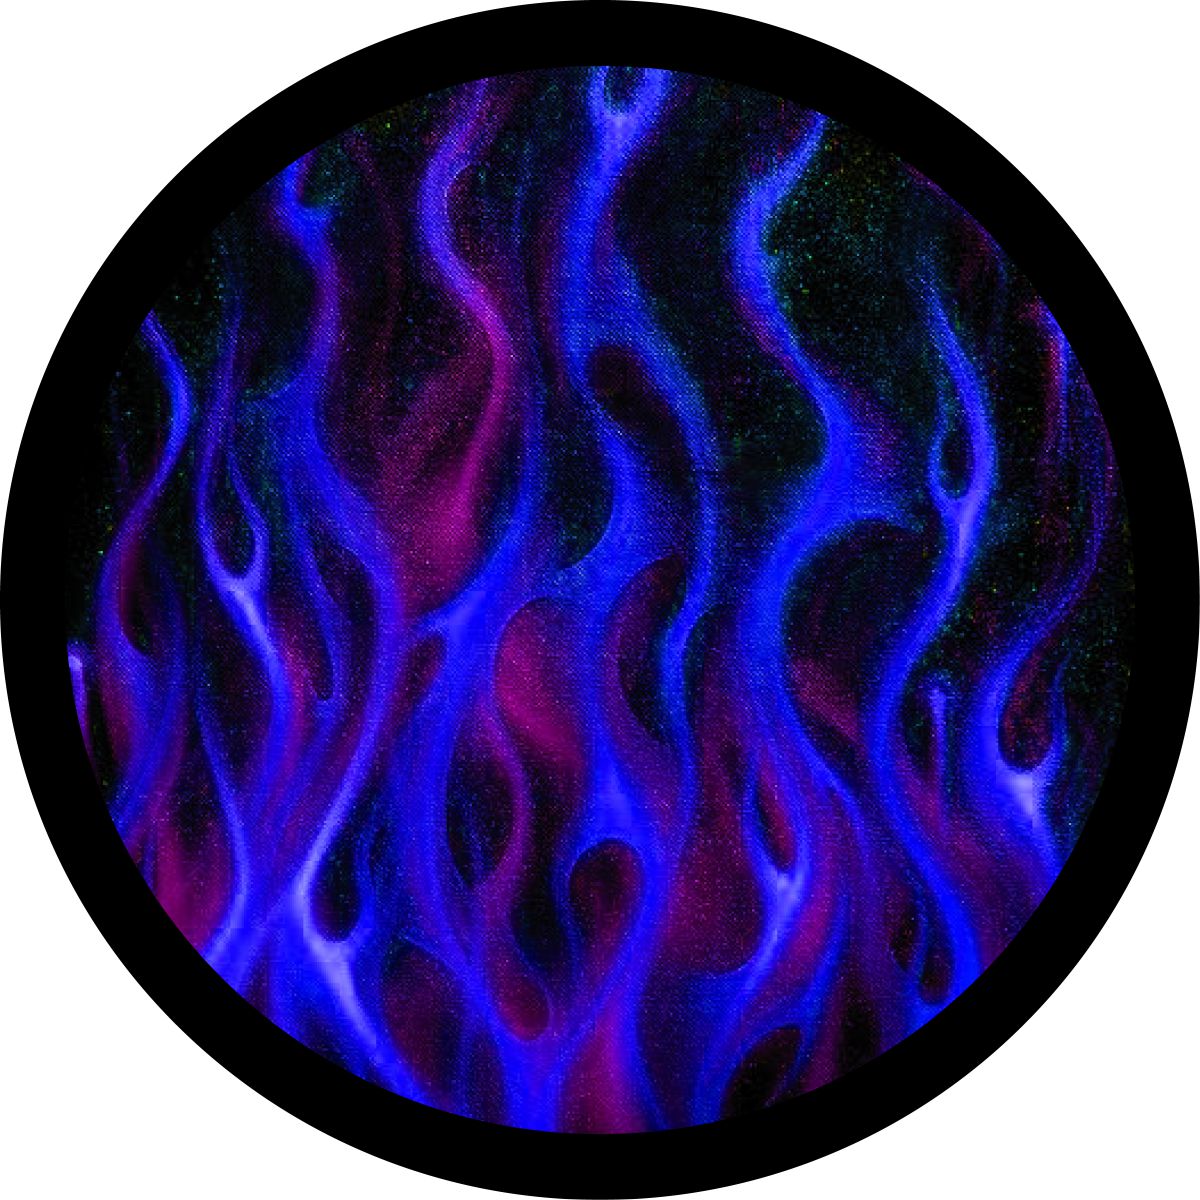 Blue flames spare tire cover design for Ford Bronco, Jeep Wrangler, Jeep Liberty, RV, Camper, Sprinter Van and more